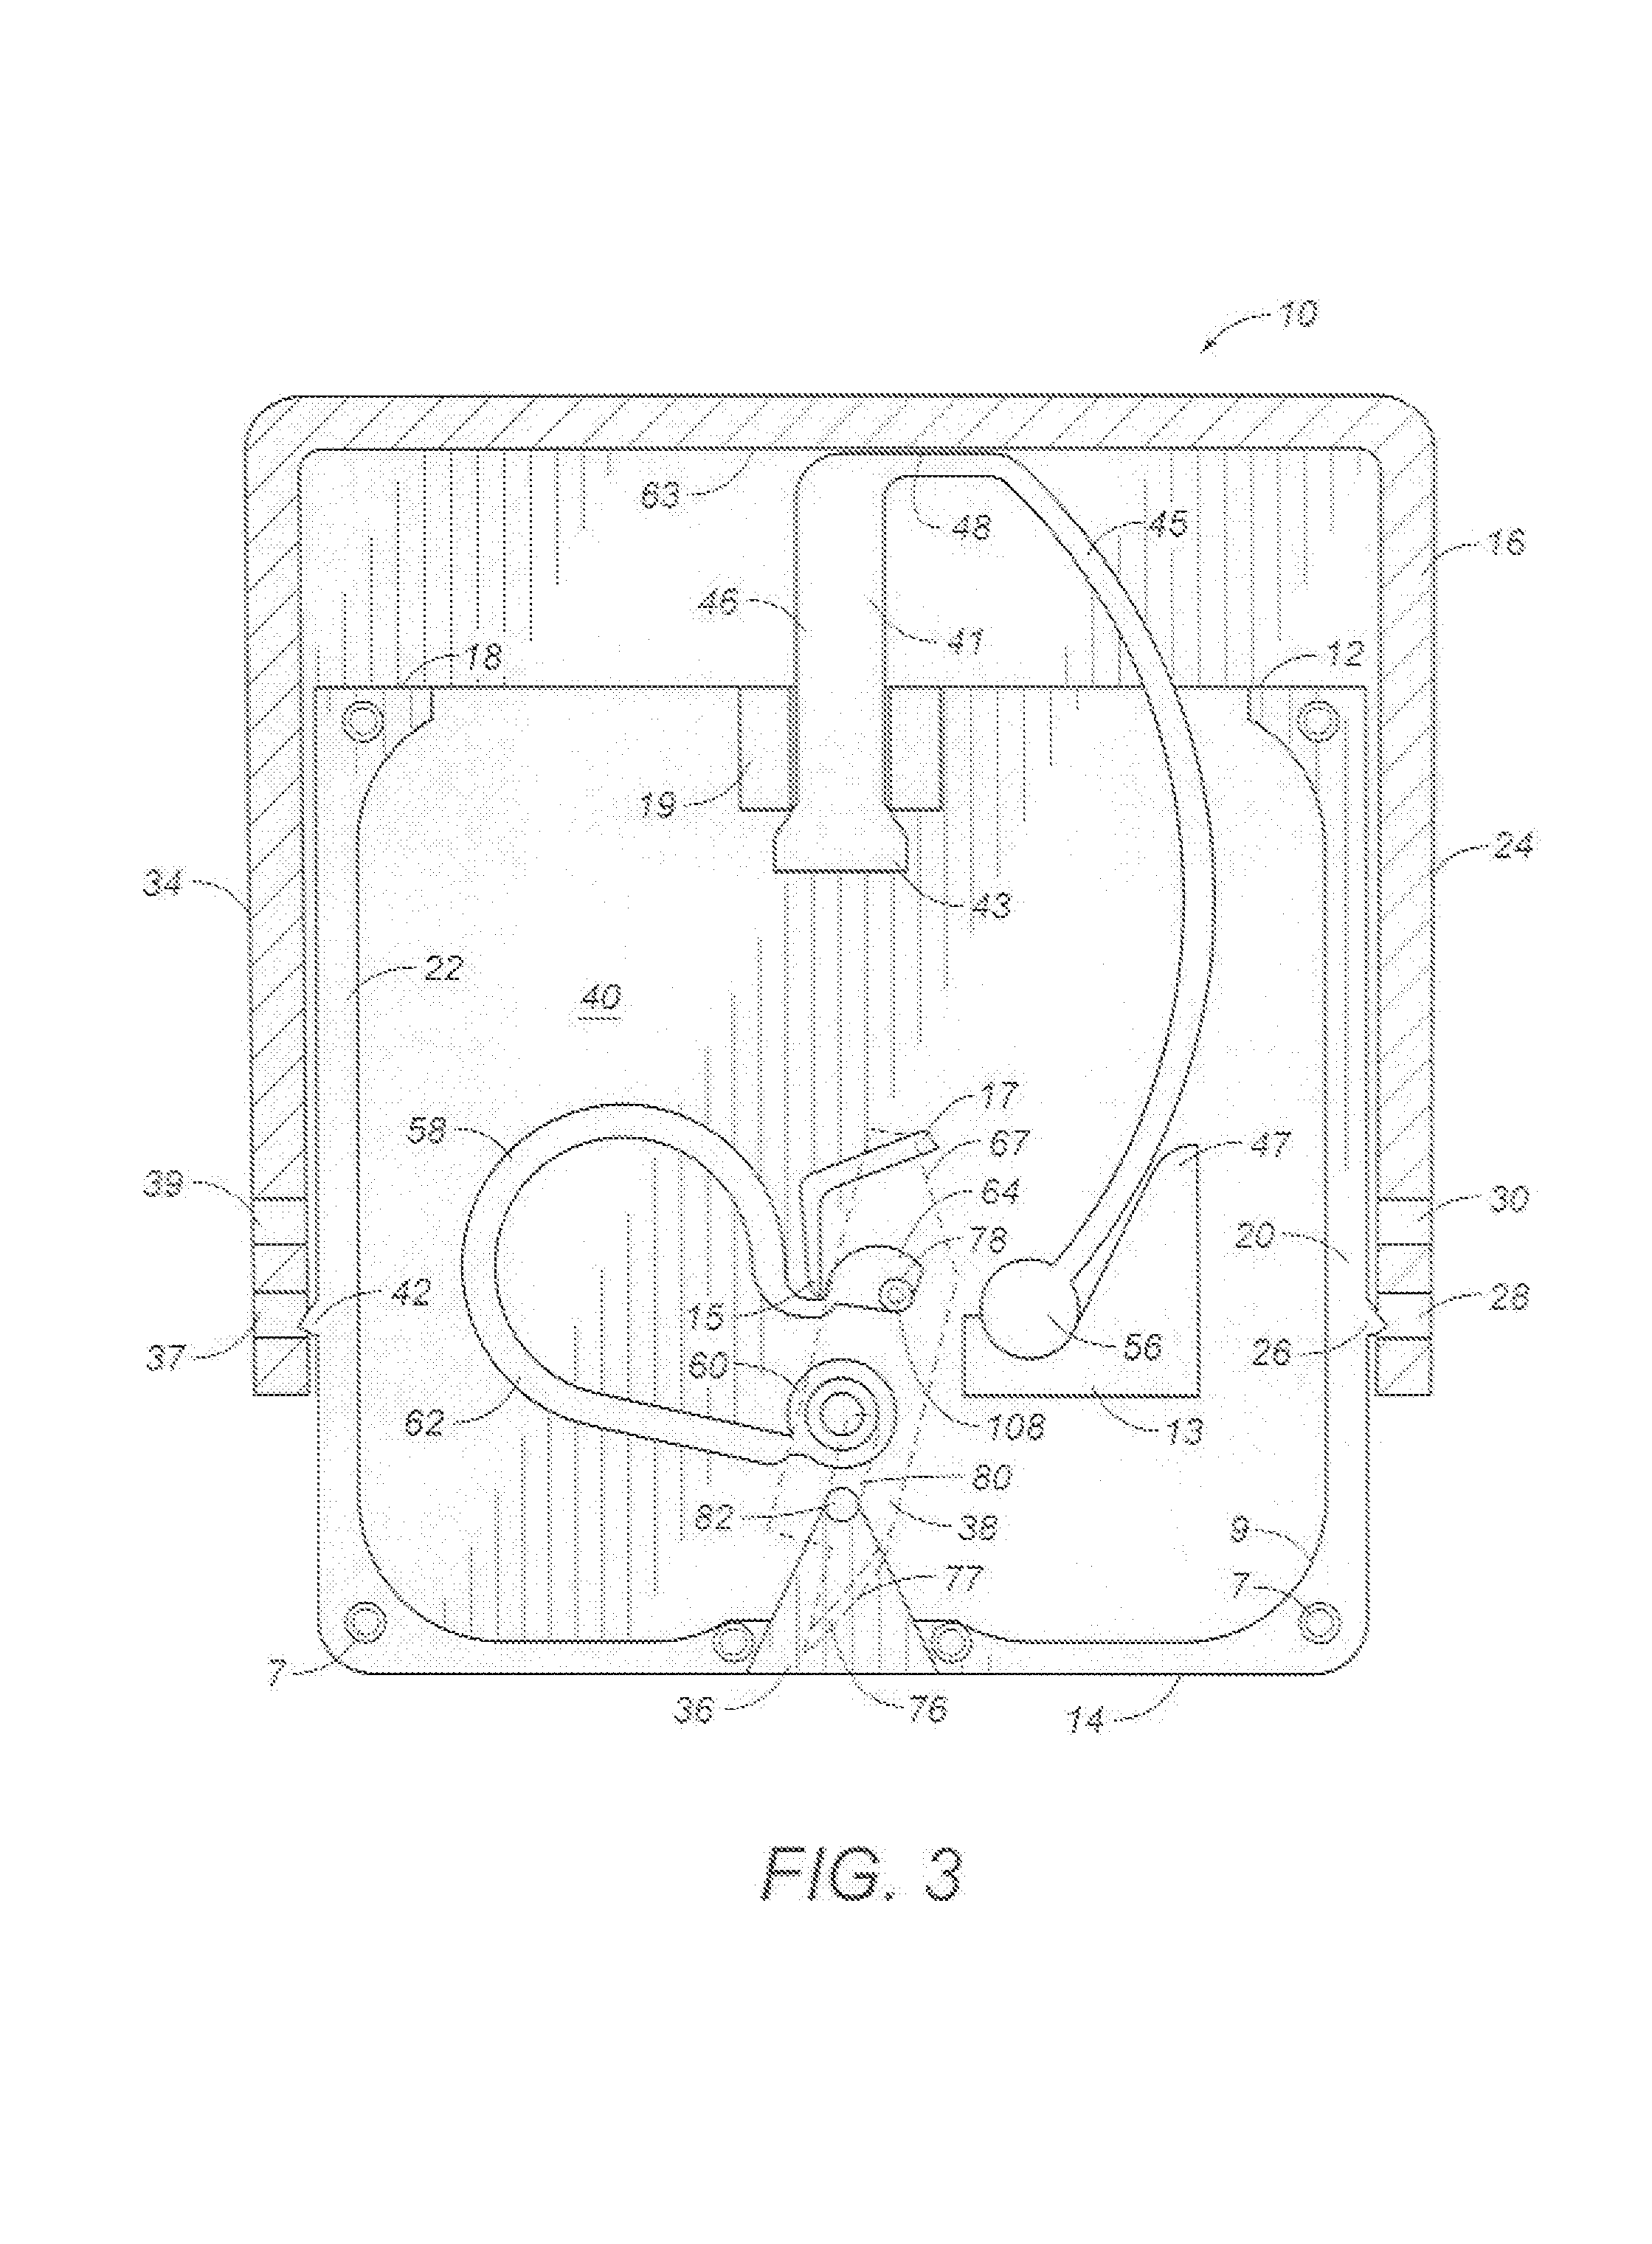 Load-controlled device for a patterned skin incision